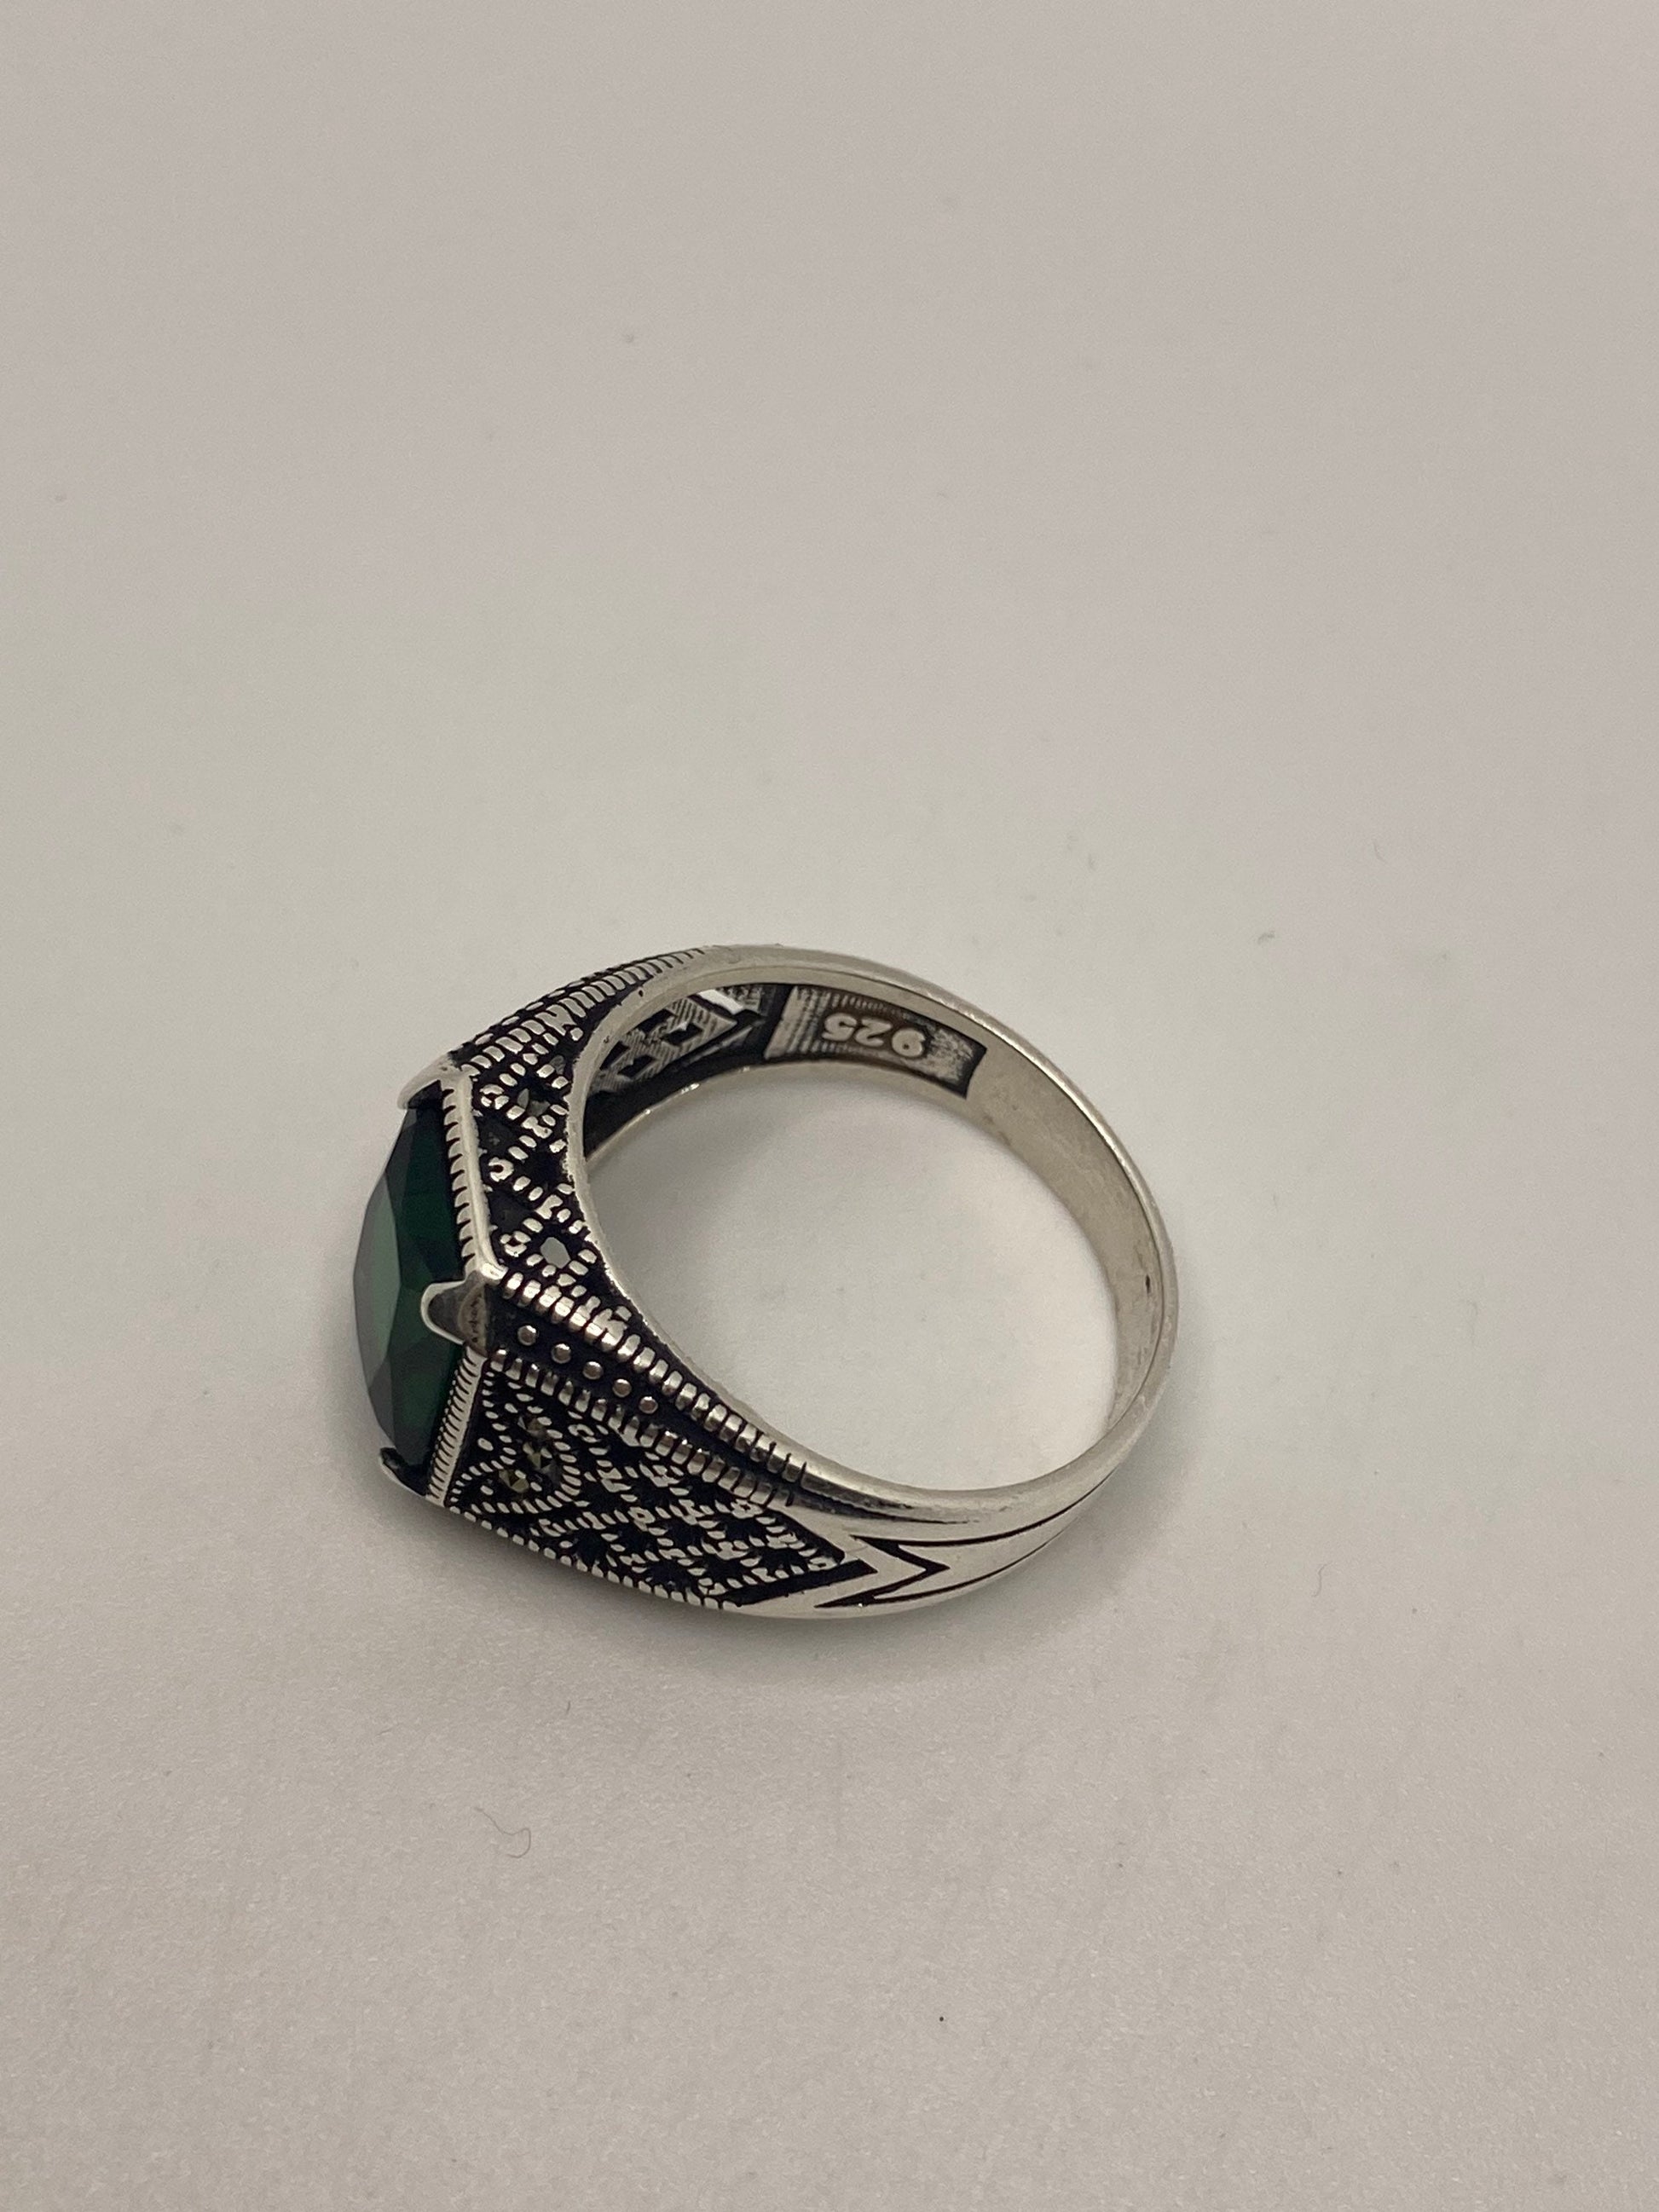 Vintage Sterling Silver Emerald Glass Mens Ring